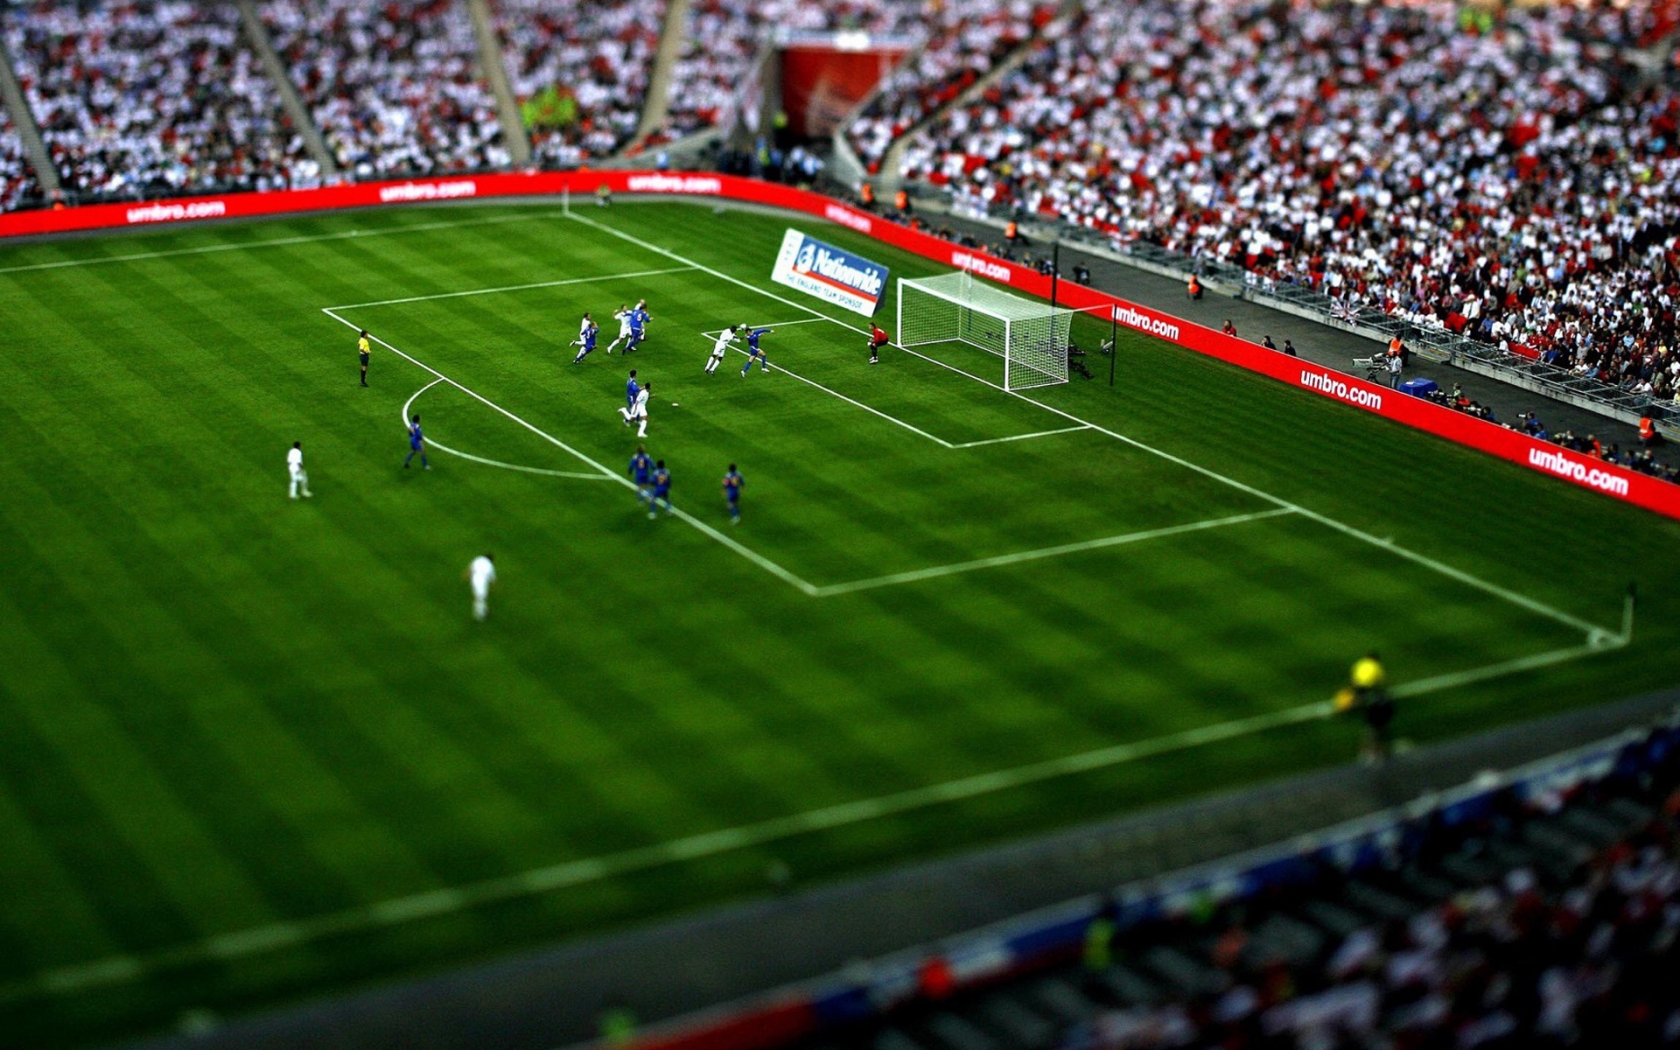 Stadium Toy Effect for 1680 x 1050 widescreen resolution